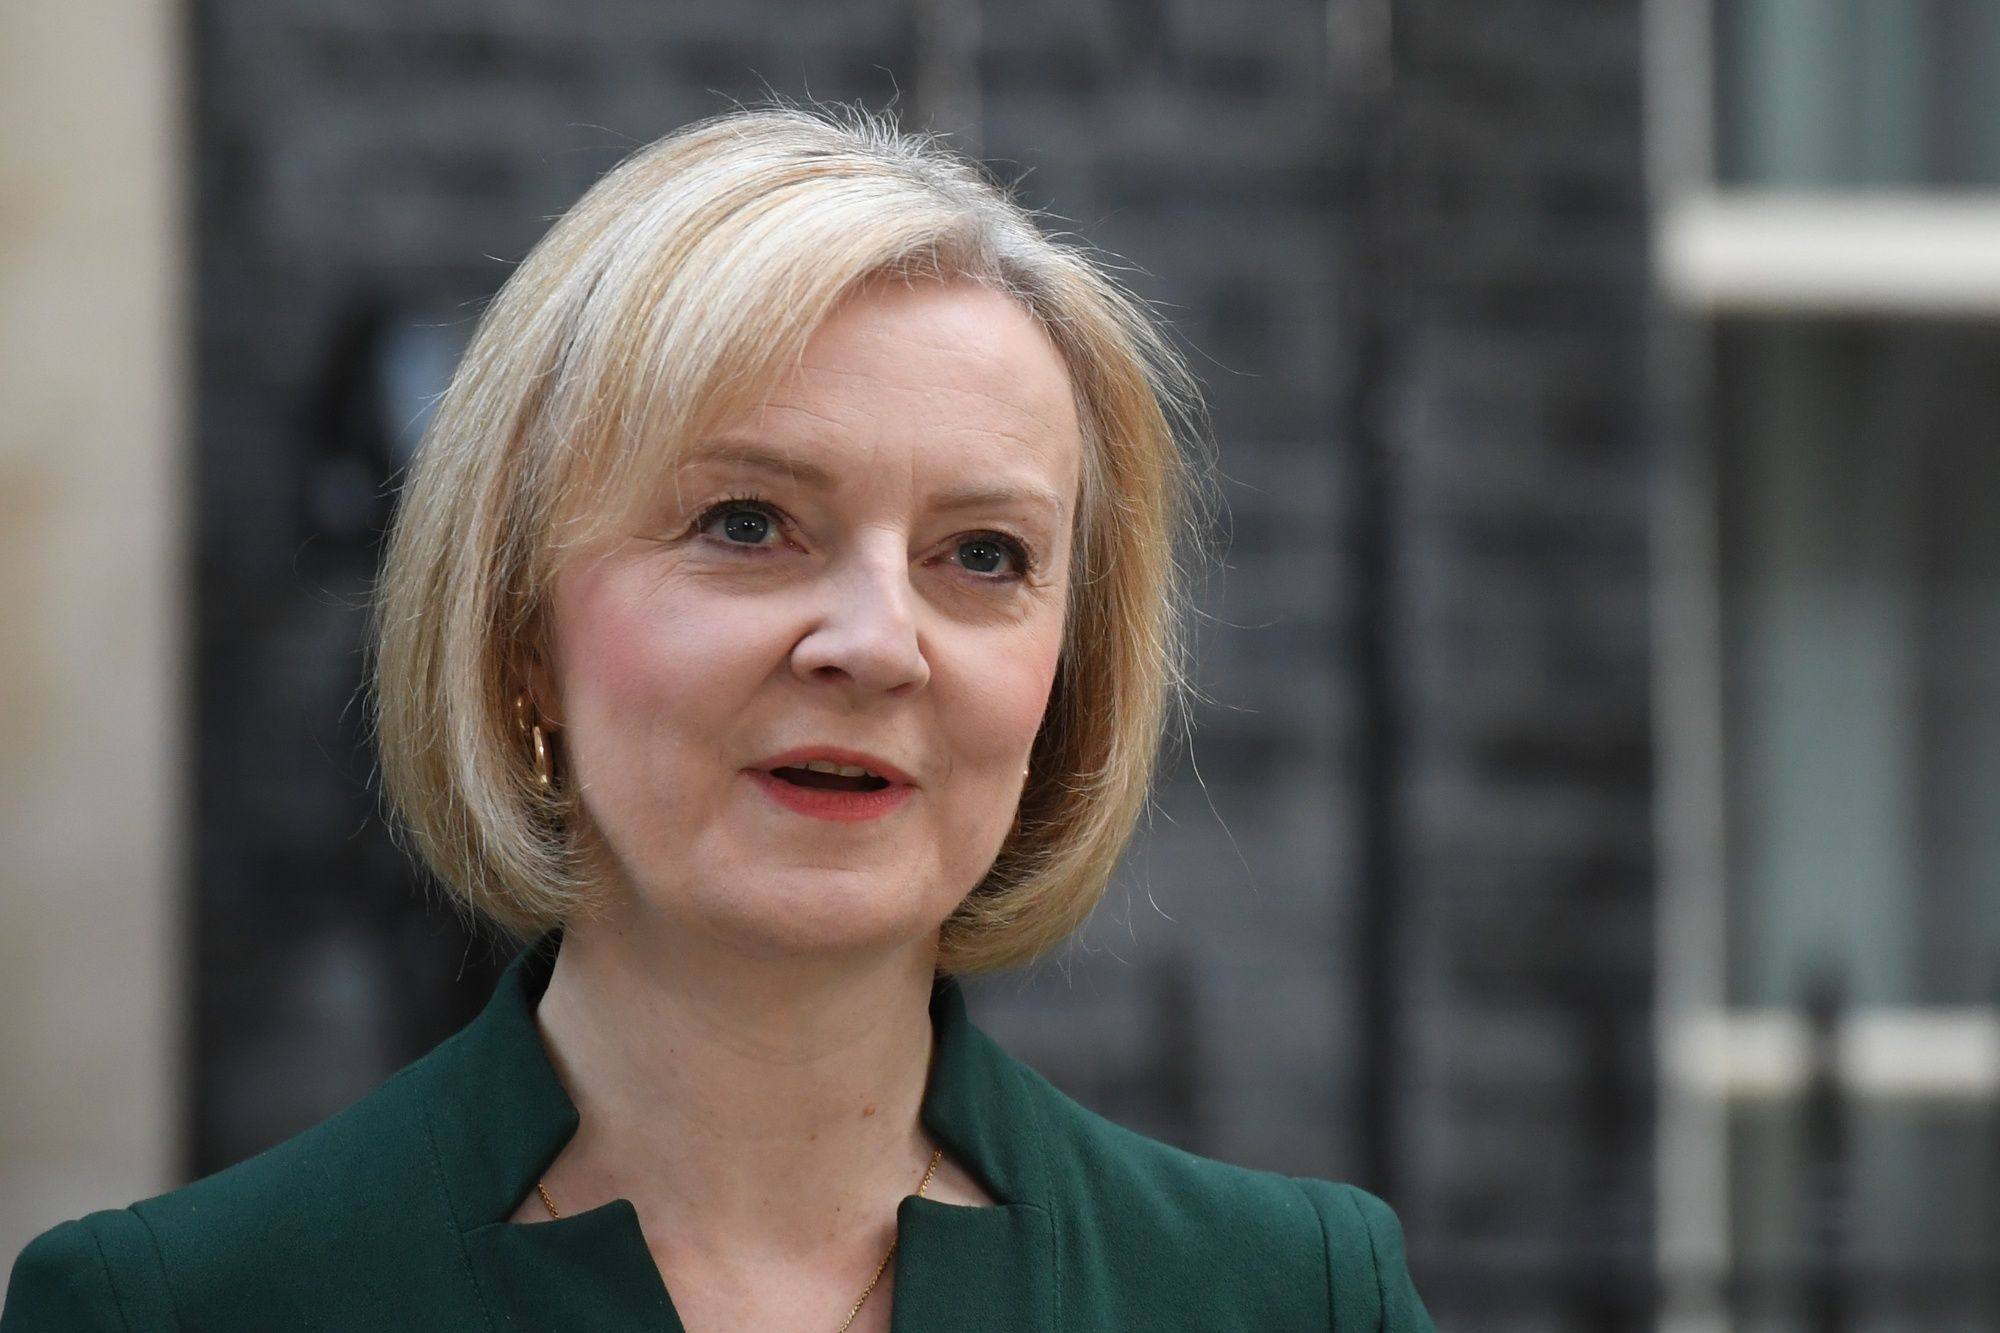 Then-outgoing UK prime minister Liz Truss delivers her departure speech outside 10 Downing Street in London on October 25, 2022. Photo: Bloomberg